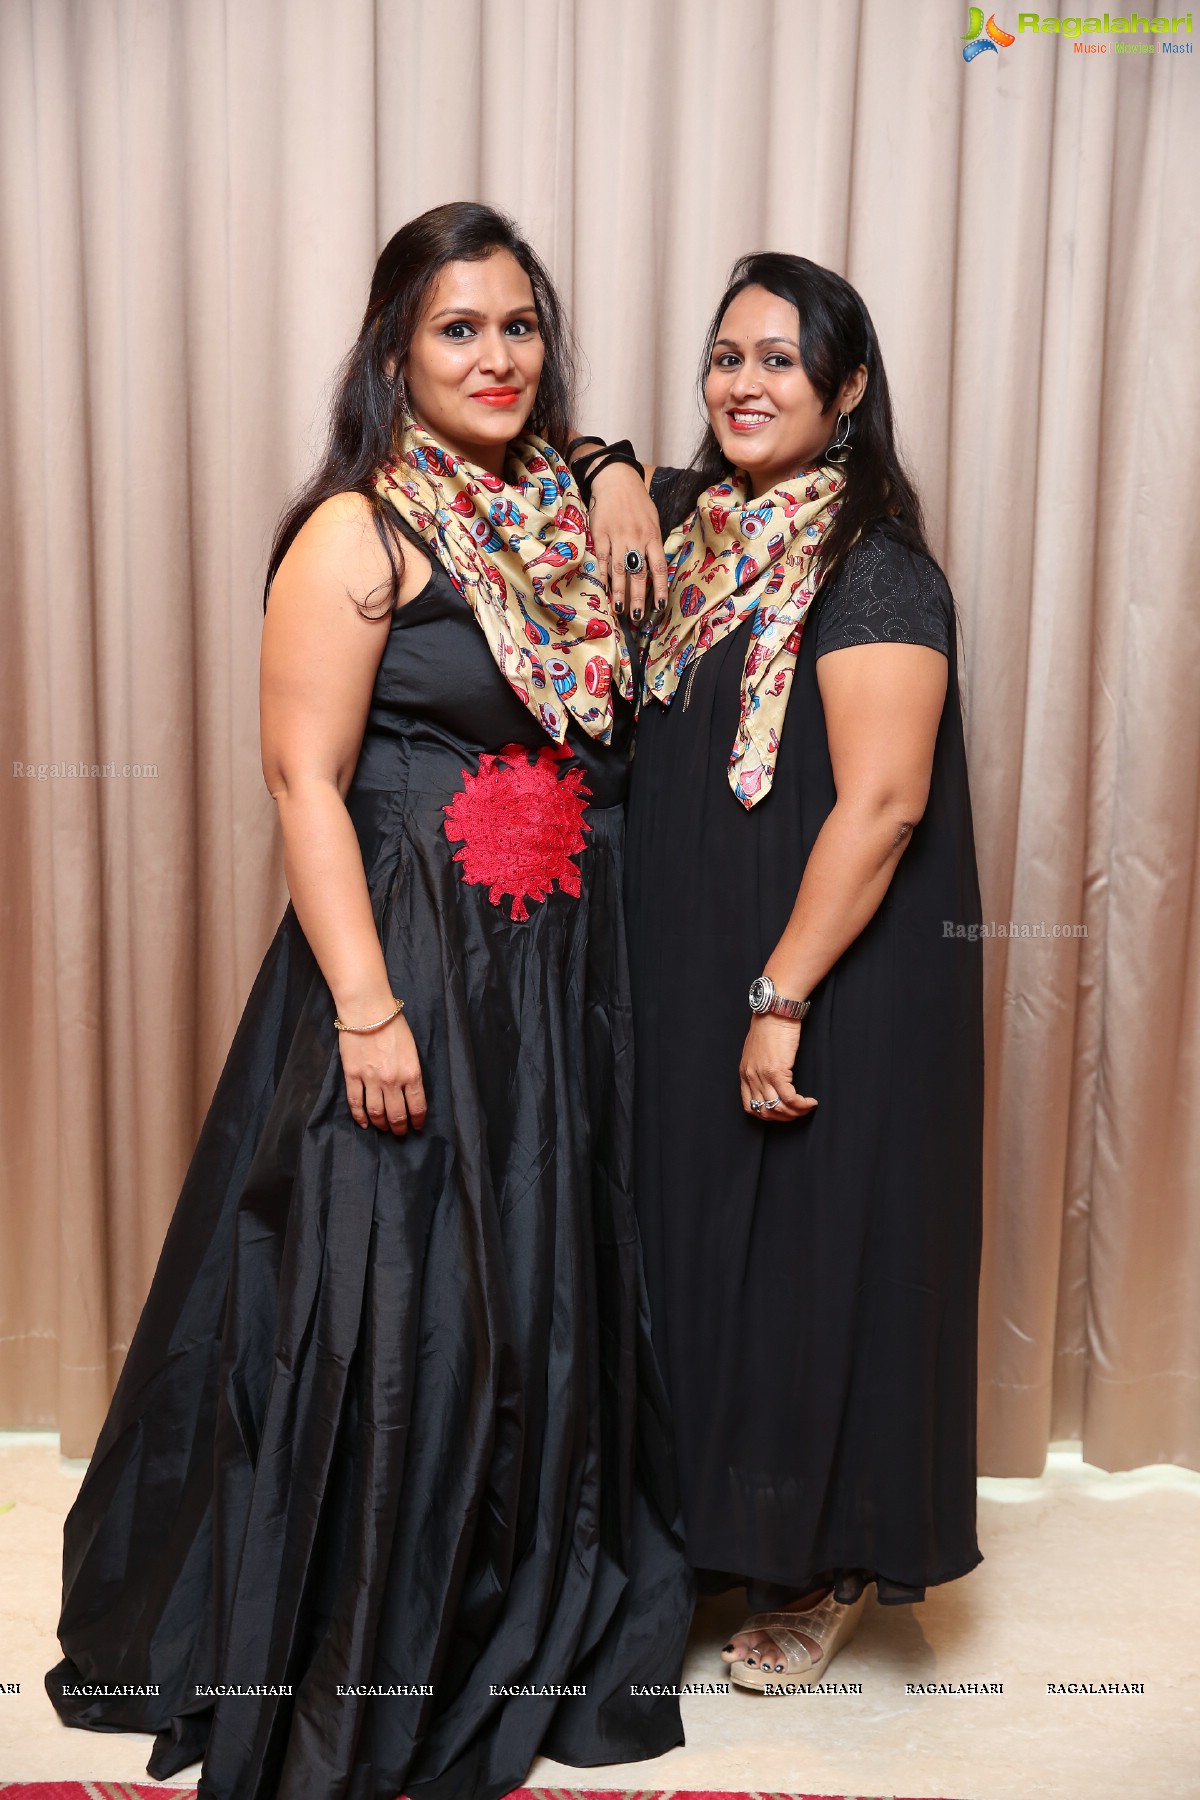 Melodies of Life by Samanvay Ladies Club at Hotel Mercure, Hyderabad